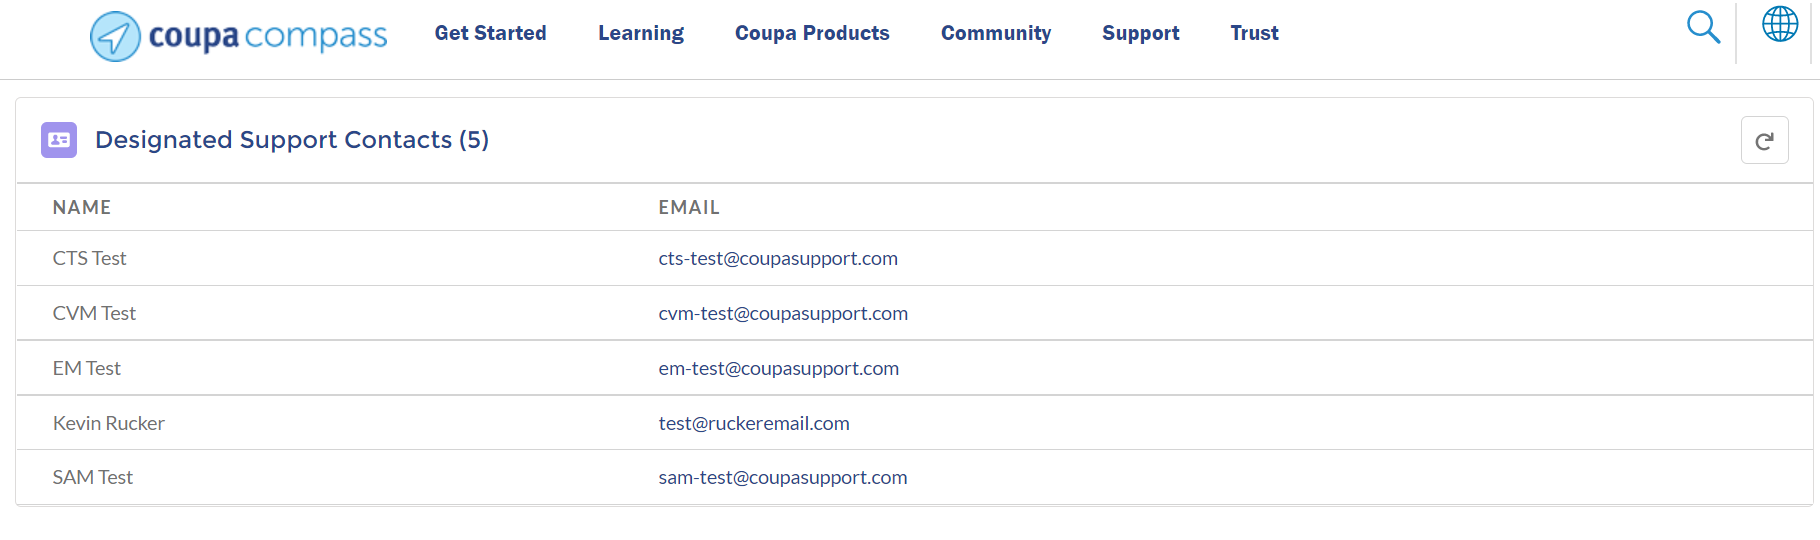 Designated Support Contacts